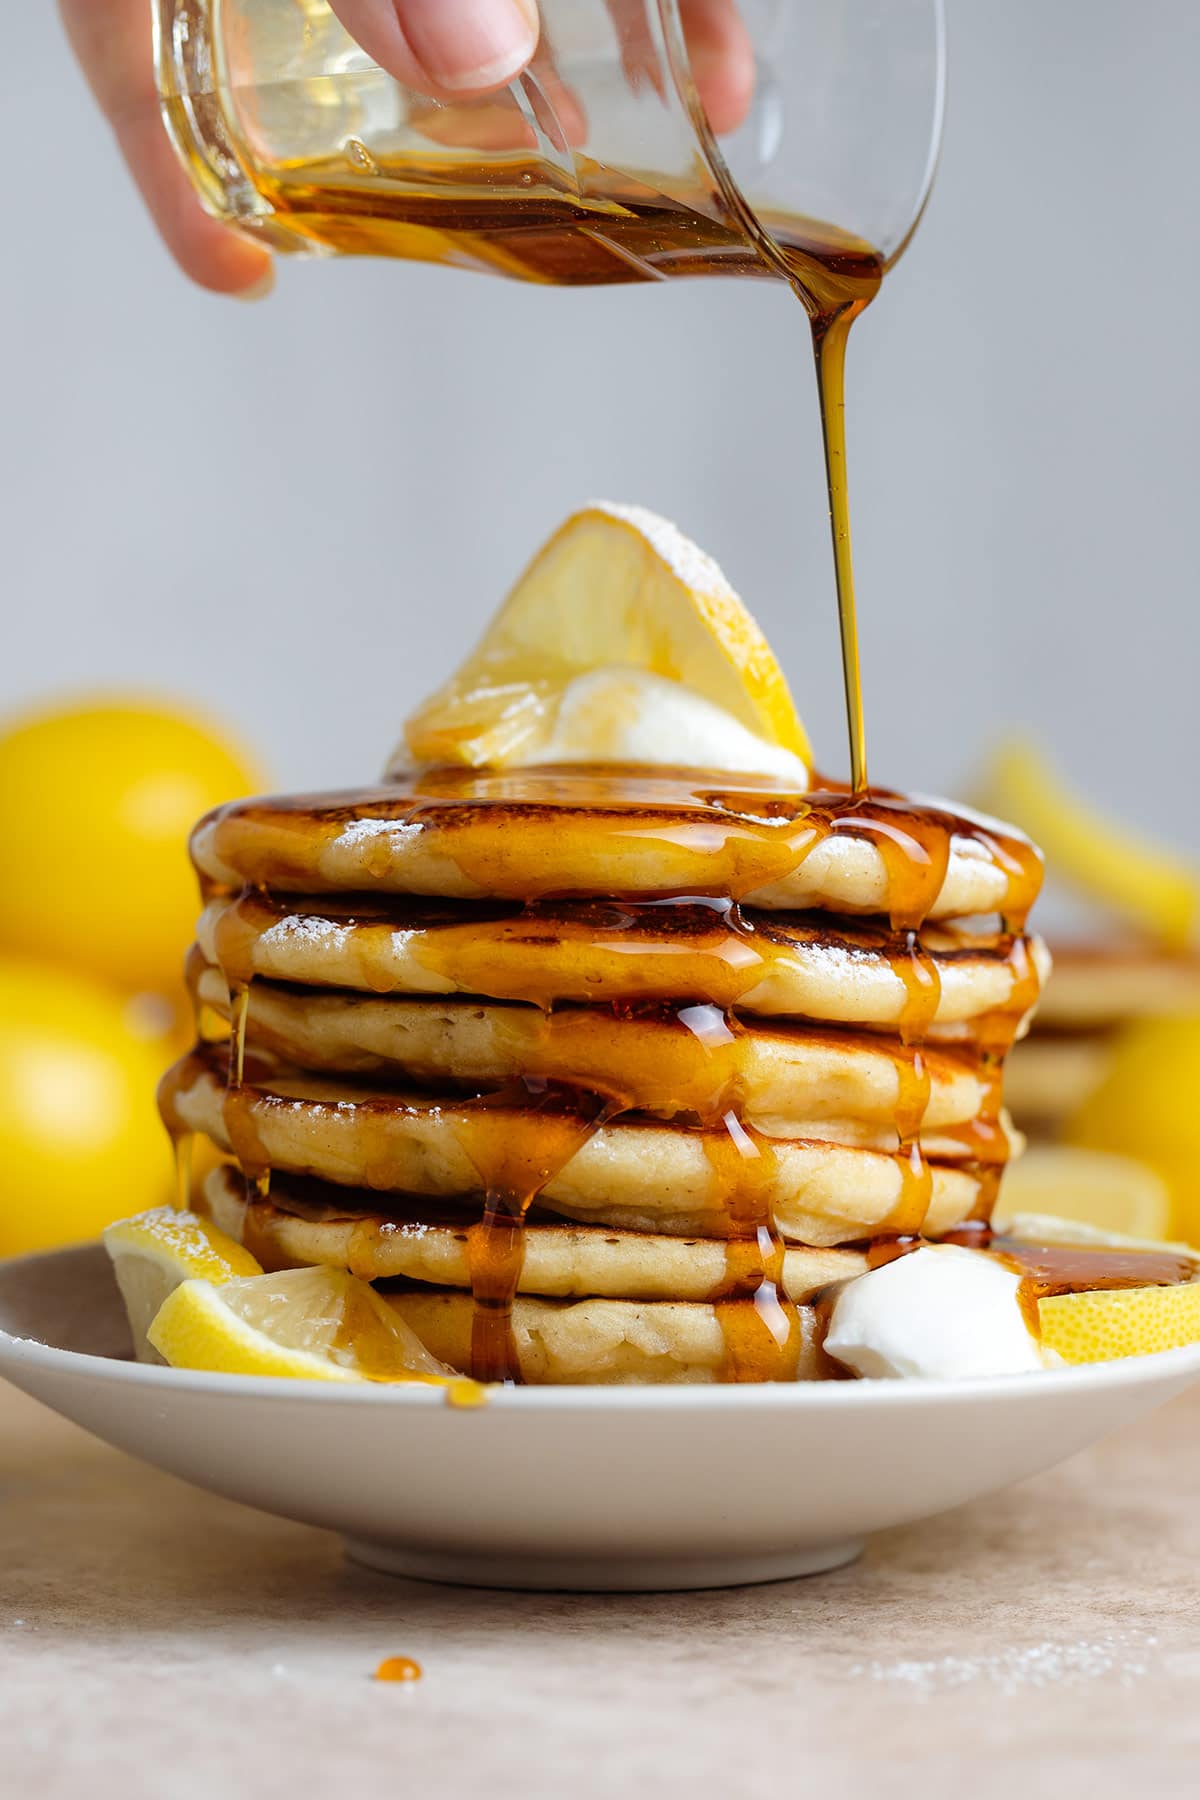 A stack of pancakes with yogurt and lemon slices being drizzled with maple syrup.